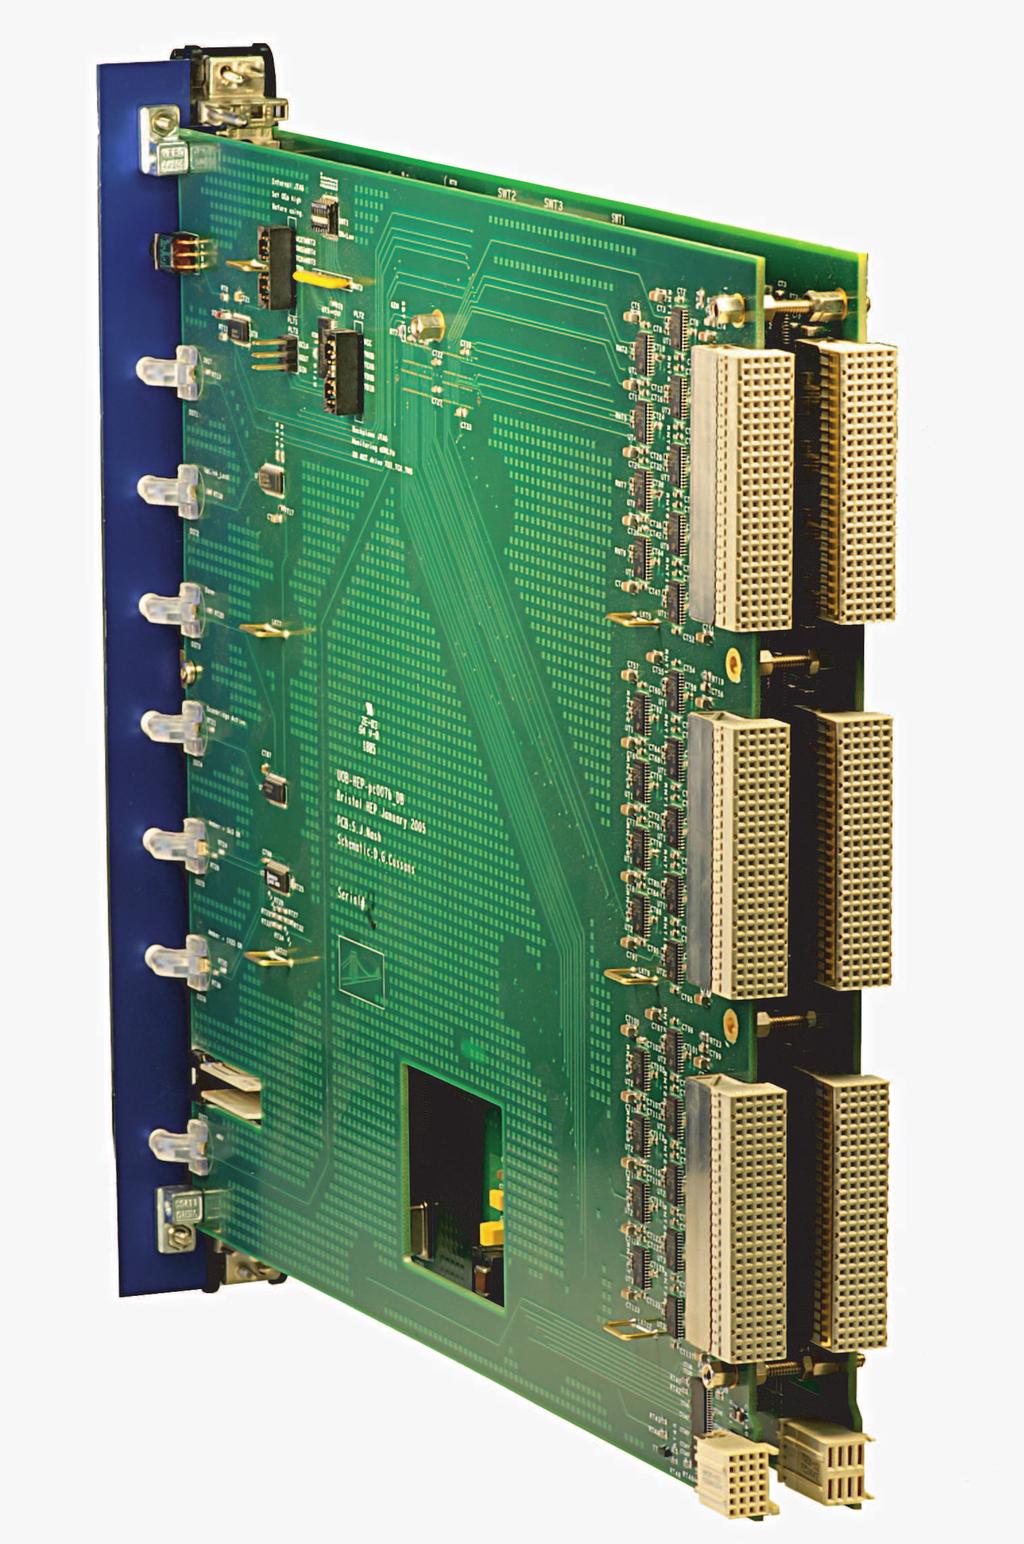 This FPGA also incorporates the routing of data to twelve output serial links. The output data are sent through six Infiniband X connectors on the front panel.